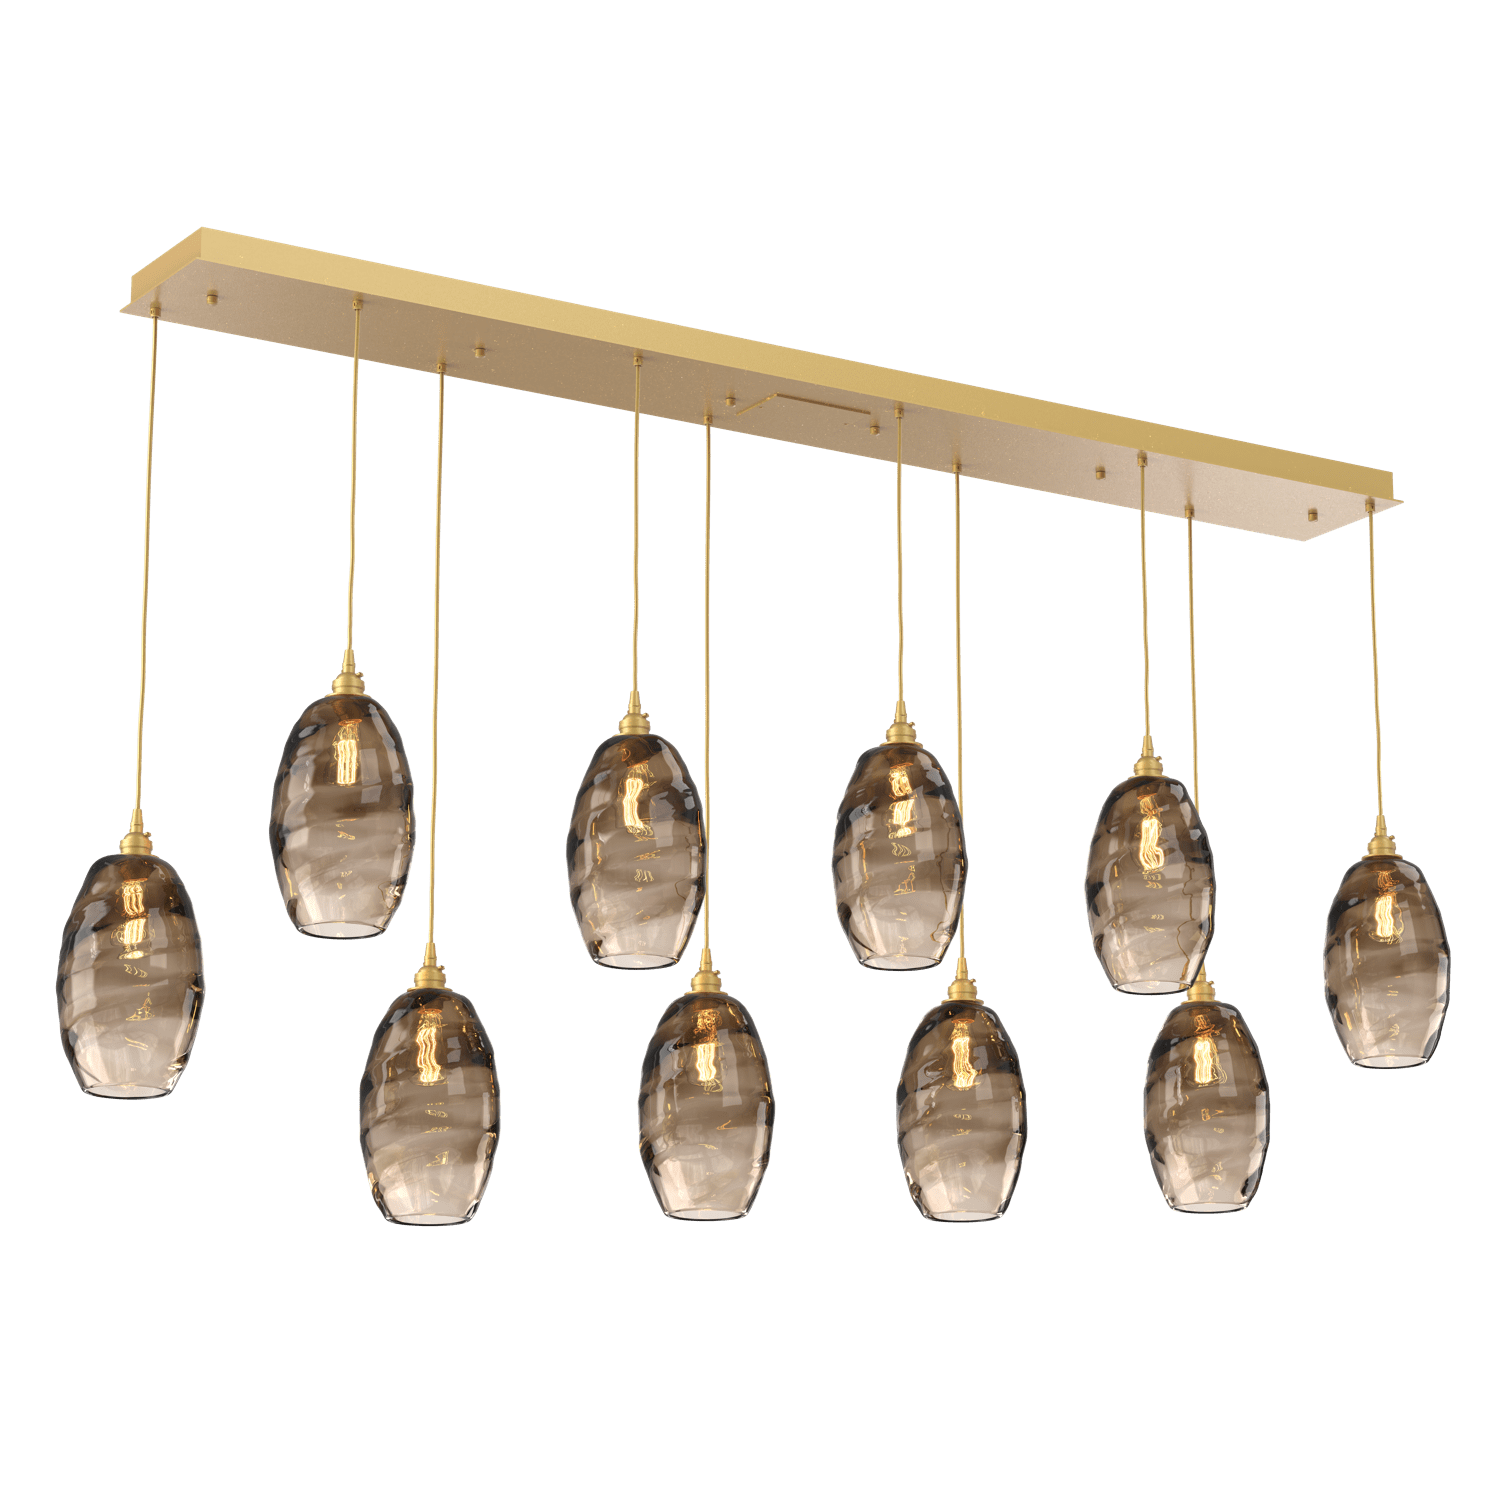 PLB0035-10-GB-OB-Hammerton-Studio-Optic-Blown-Glass-Elisse-10-light-linear-pendant-chandelier-with-gilded-brass-finish-and-optic-bronze-blown-glass-shades-and-incandescent-lamping